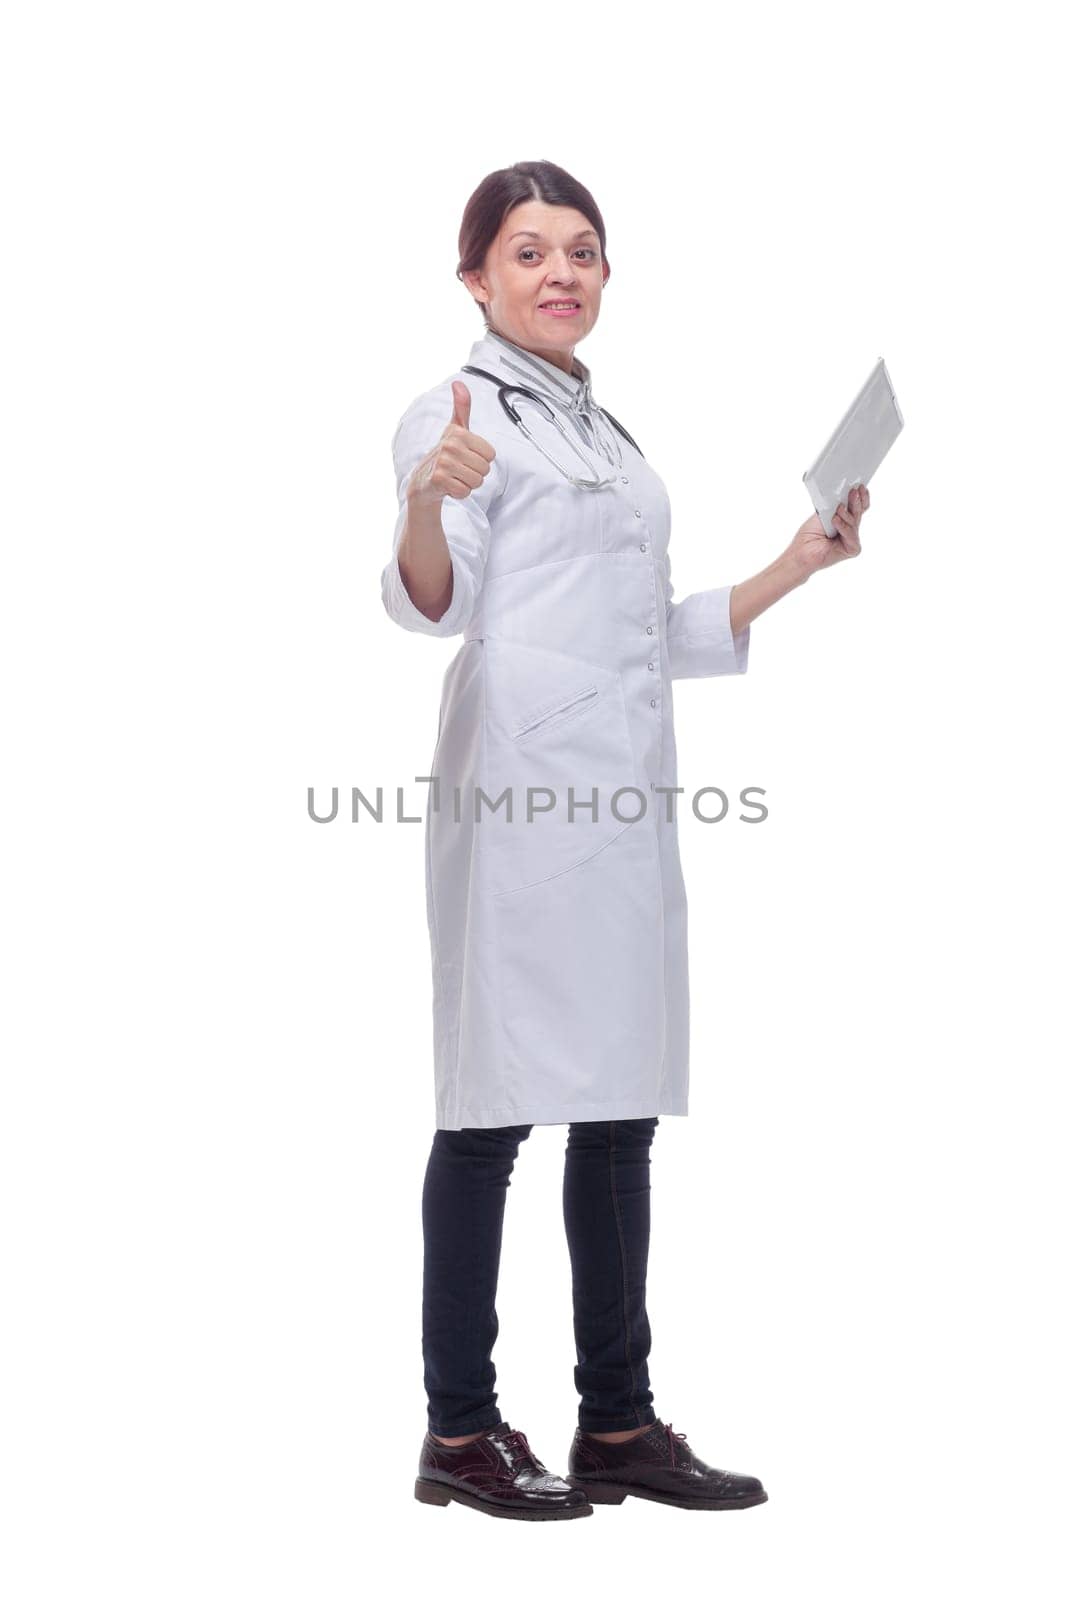 Smiling female doctor or nurse with tablet pc computer showing thumbs up. Healthcare, technology and medicine concept